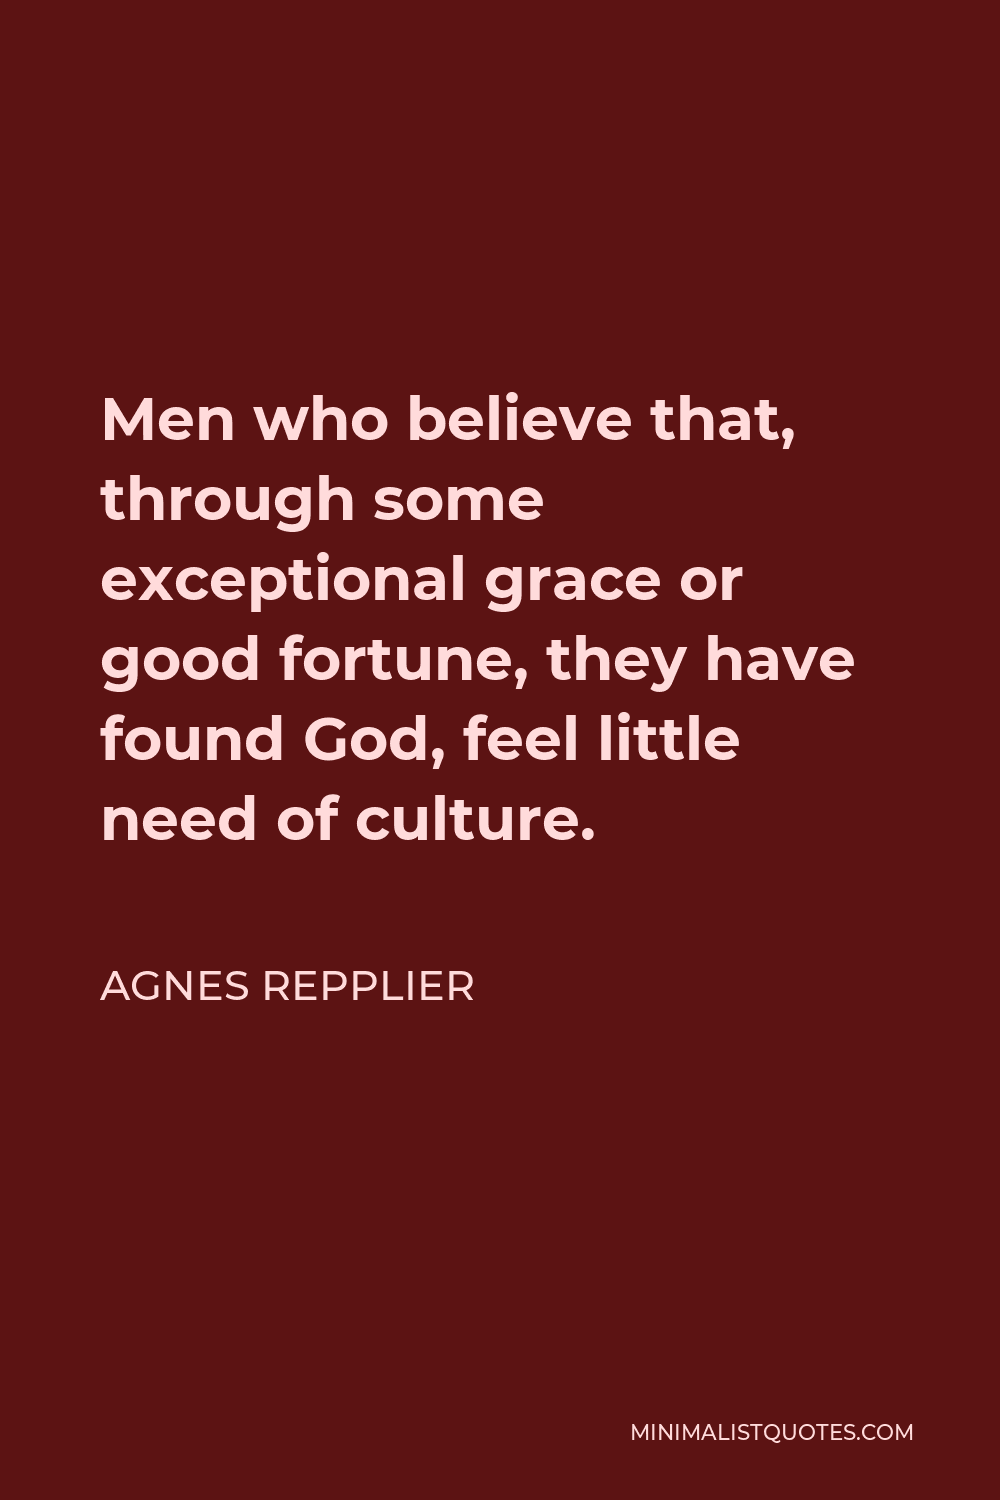 Agnes Repplier Quote - Men who believe that, through some exceptional grace or good fortune, they have found God, feel little need of culture.